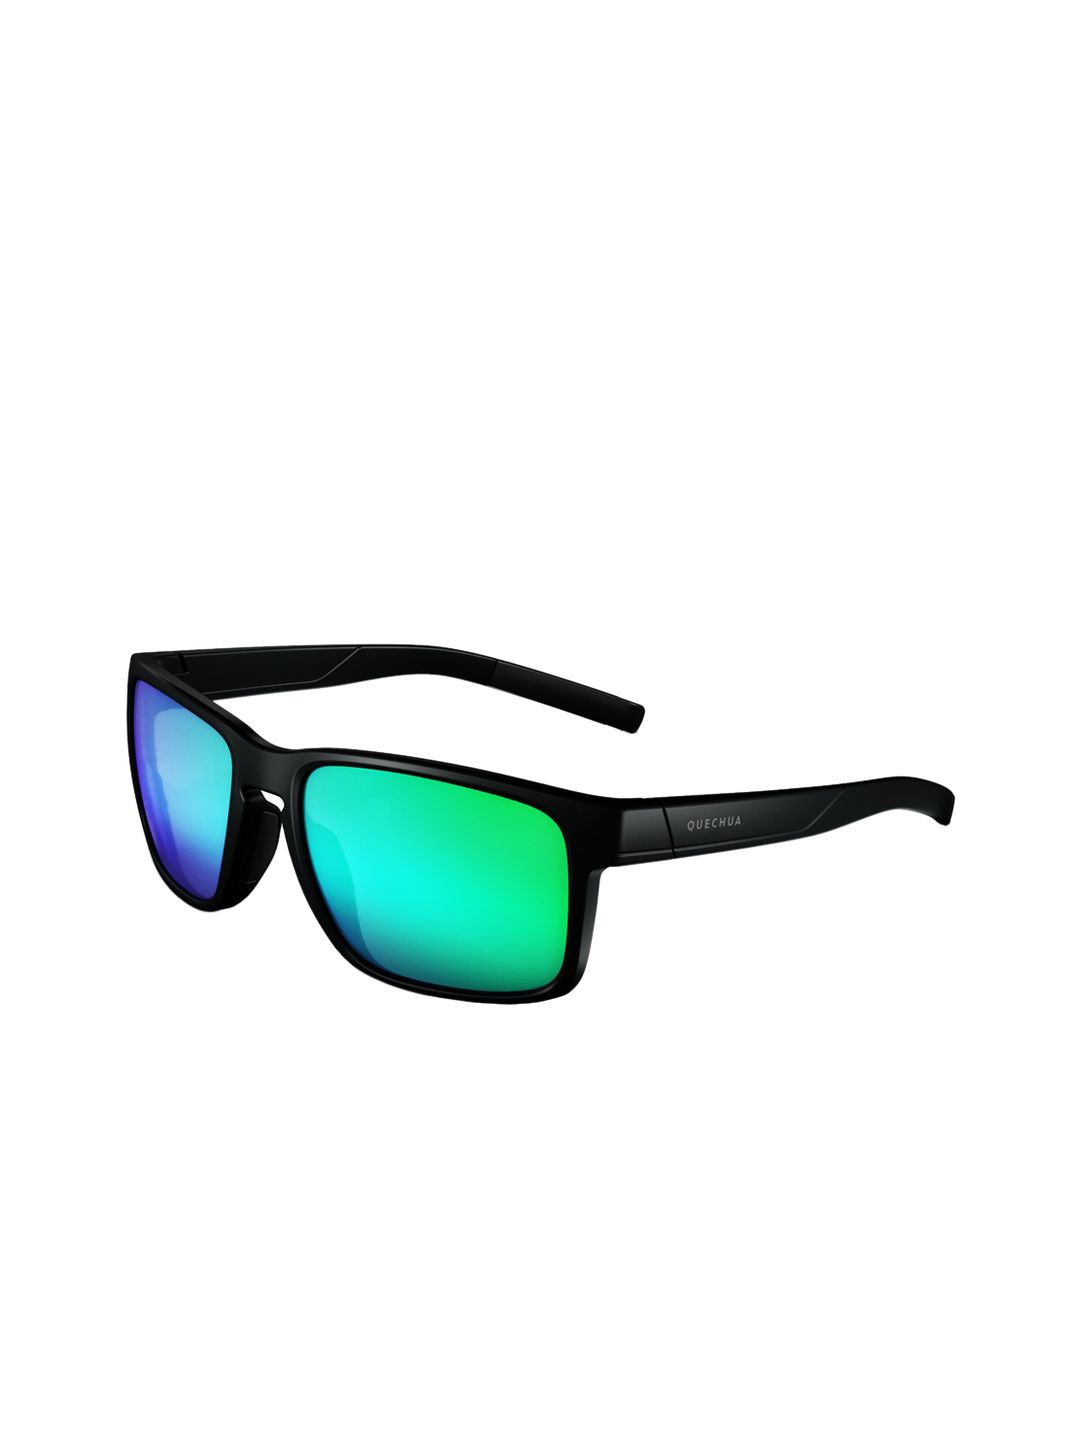 Quechua By Decathlon Unisex Green Lens & Black Rectangle Sunglasses MH530 Category 3 Price in India